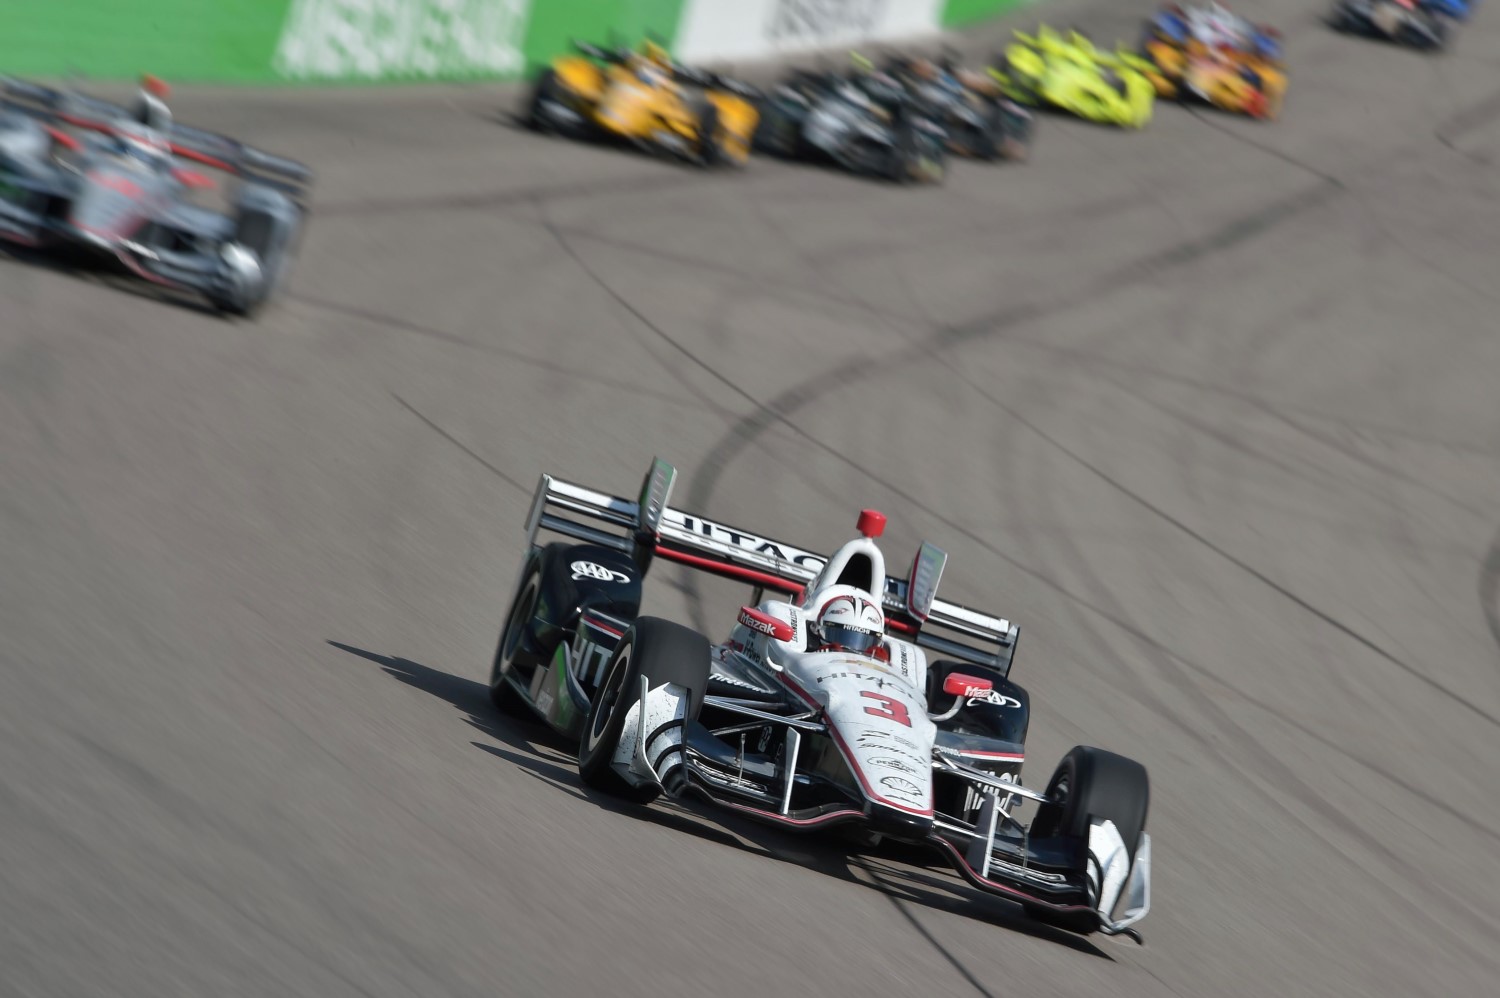 Castroneves charges to victory